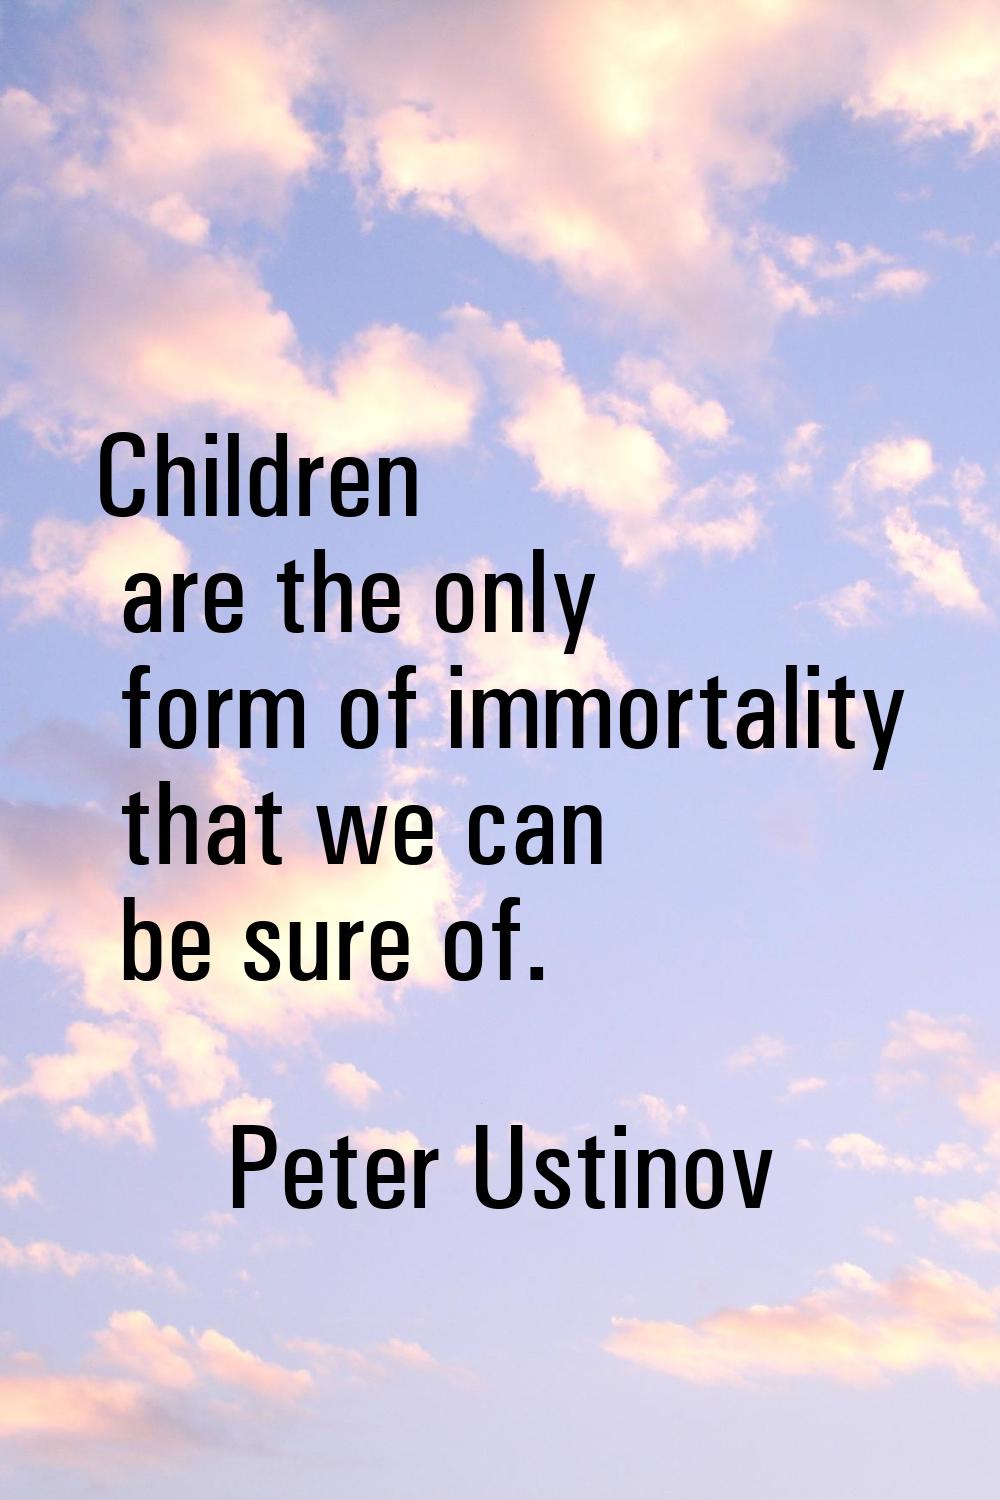 Children are the only form of immortality that we can be sure of.